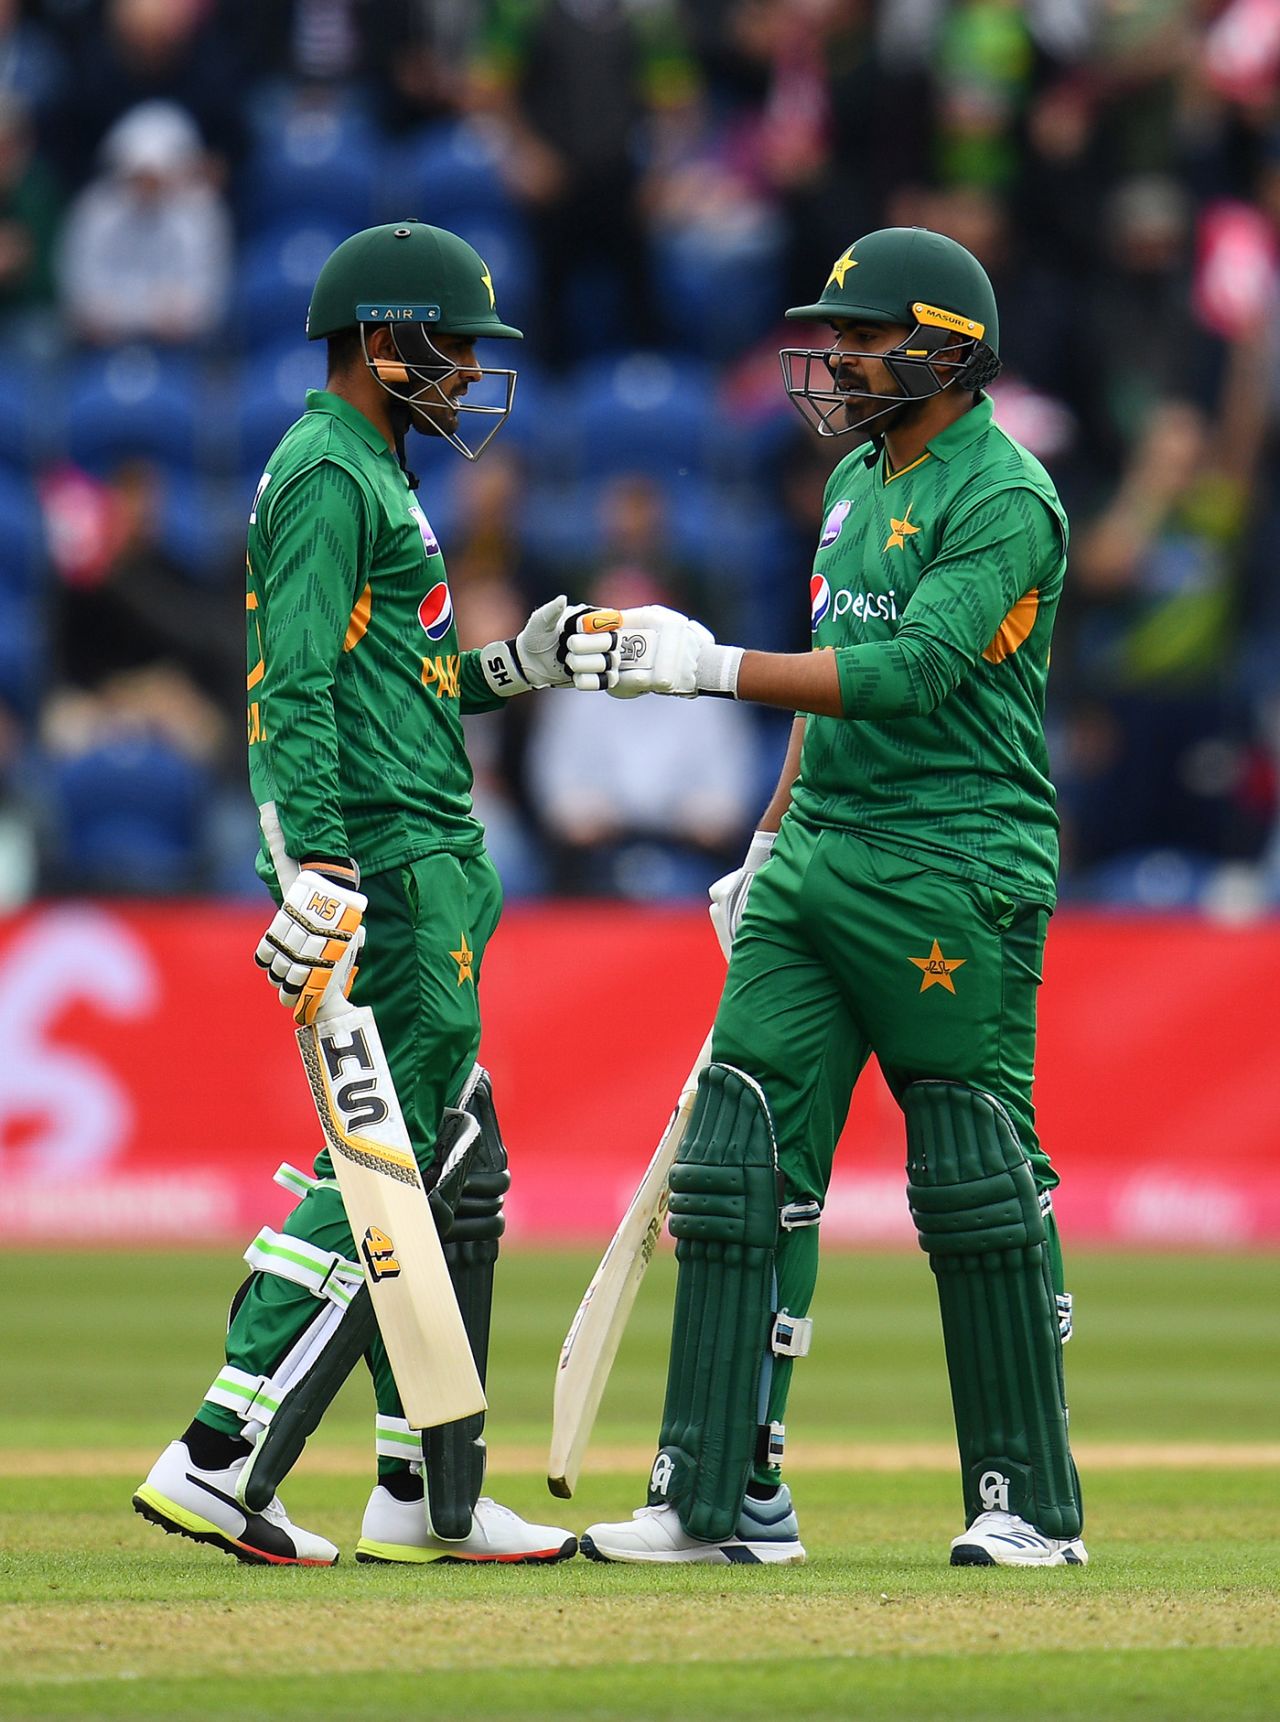 Babar Azam and Haris Sohail shared a century stand, England v Pakistan, only T20I, Cardiff, May 5, 2019